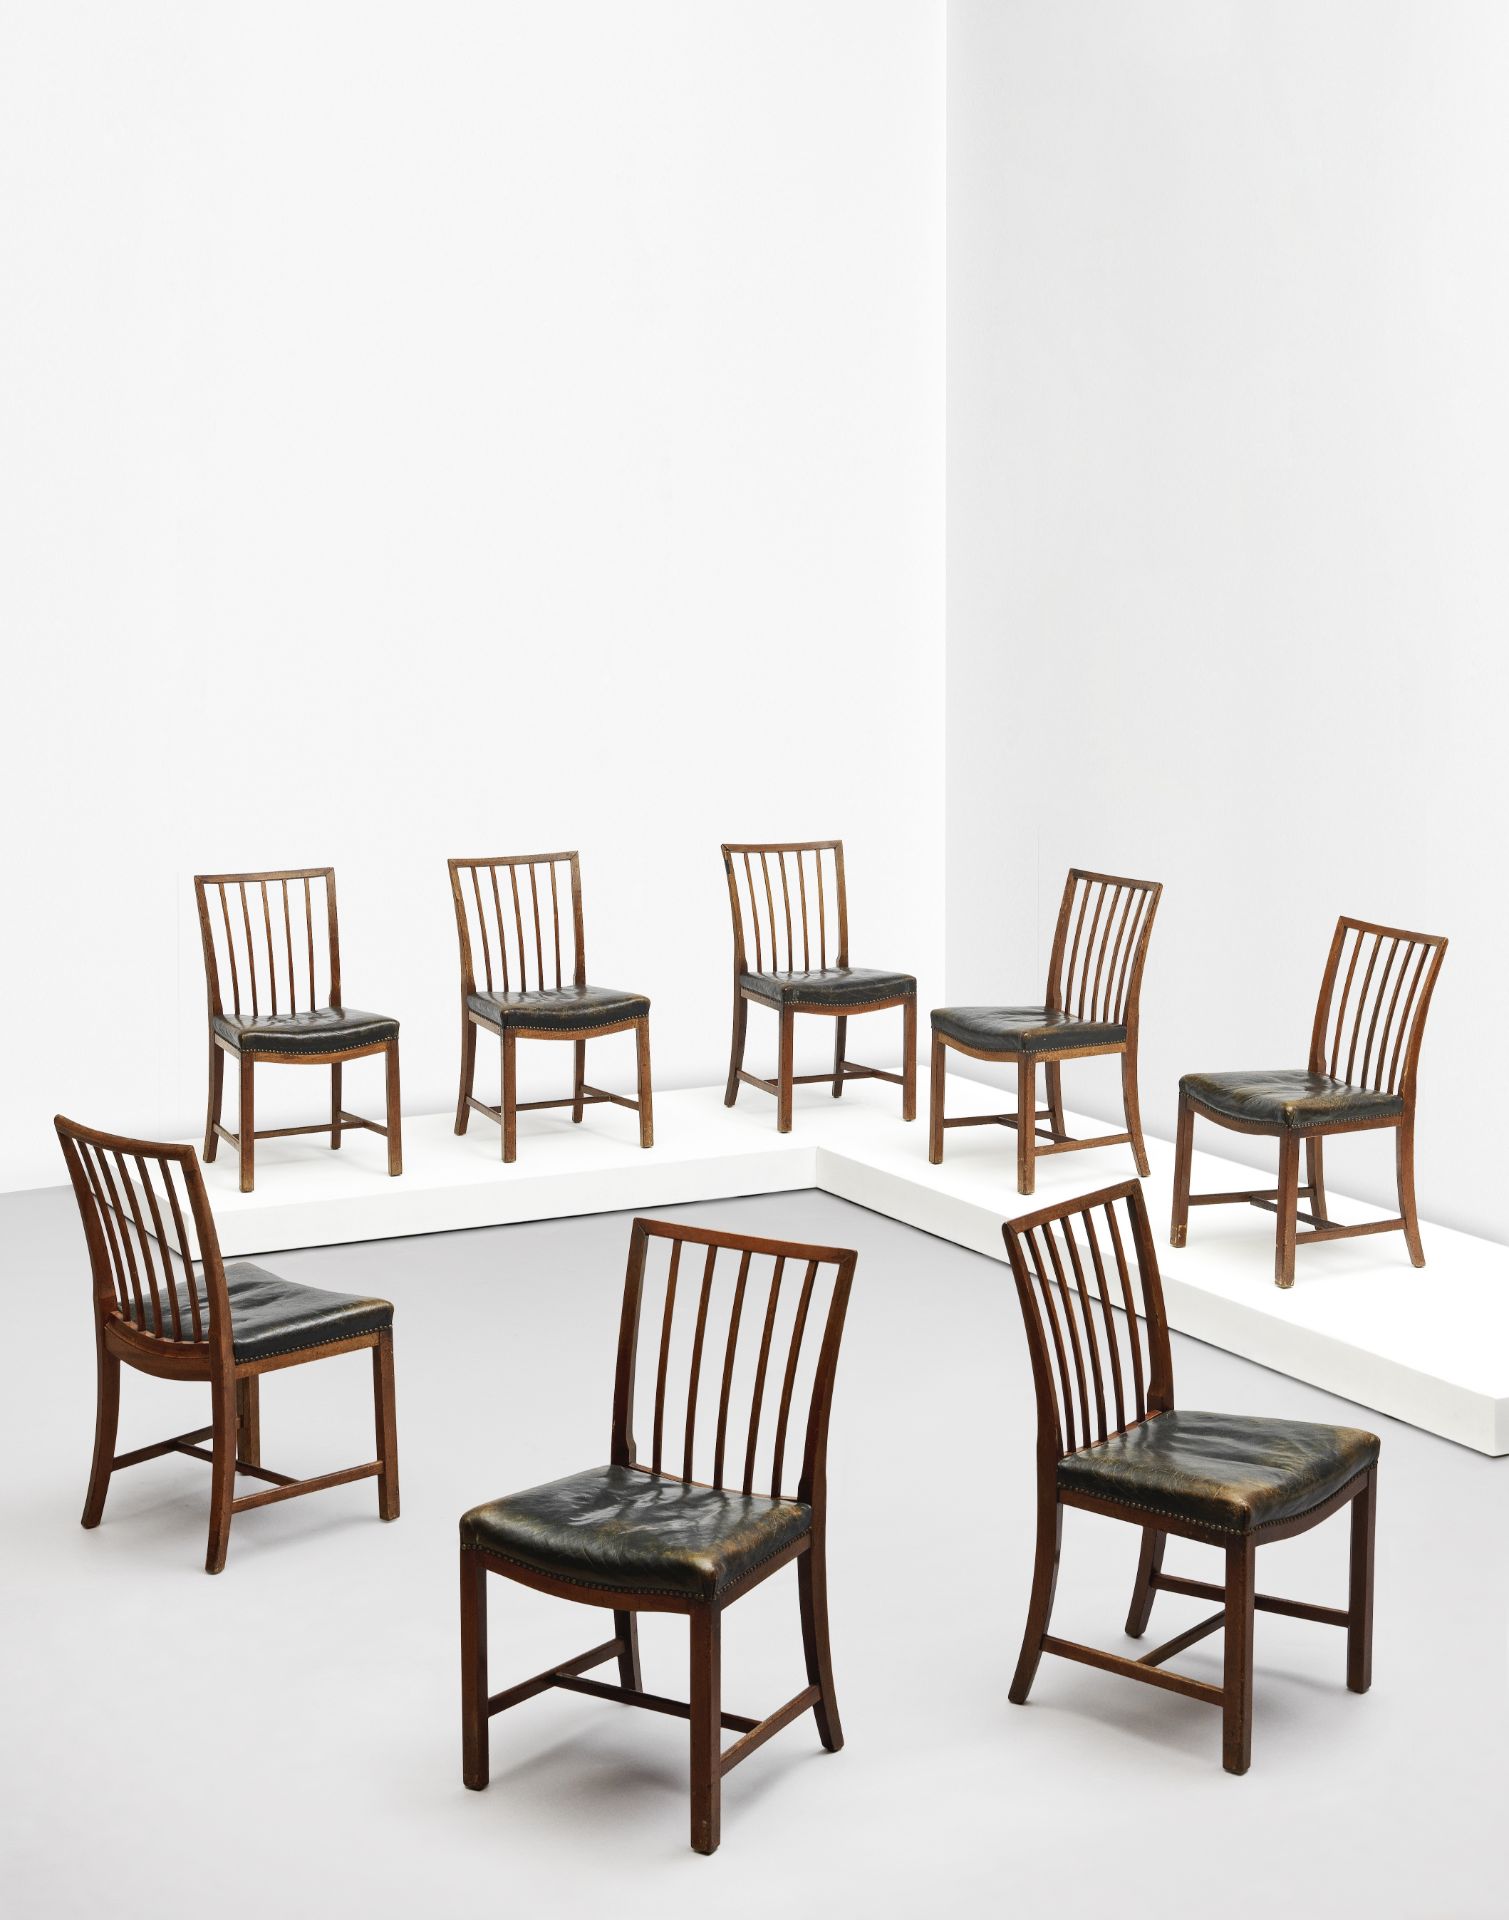 Frits Henningsen Set of eight dining chairs, circa 1935-1945